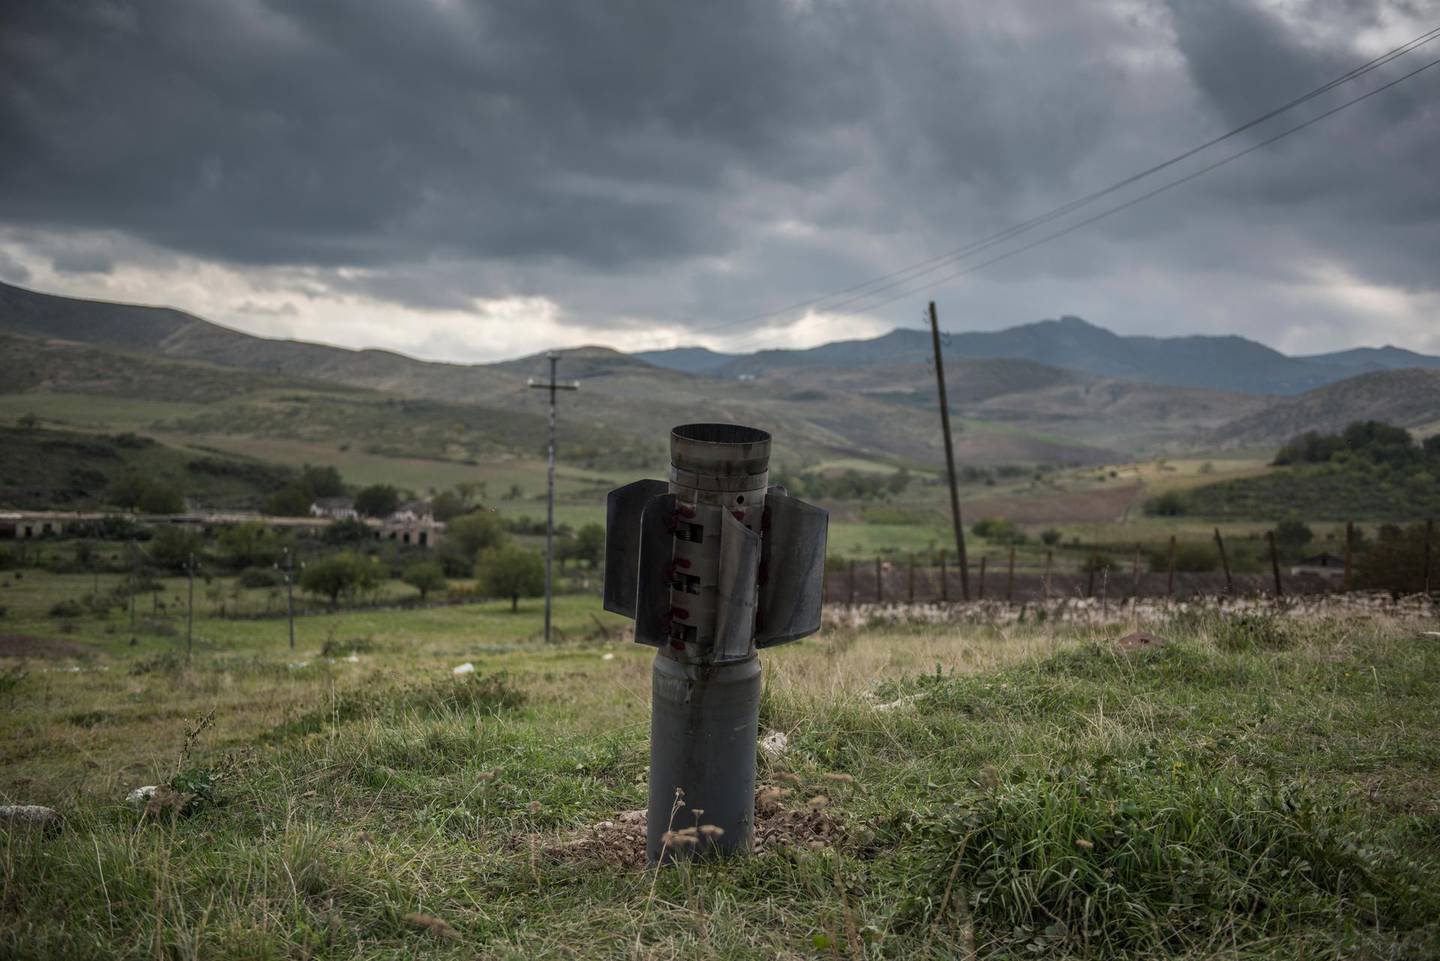 In this image released by World Press Photo, Thursday April 15, 2021, by Valery Melnikov, Sputnik, part of a series titled Paradise Lost, which won the first prize in the General News Stories category, shows A rocket remaining after the shelling of the city of Martuni (Khojavend), Nagorno-Karabakh, lies in a field, on 10 November, the day the peace agreement between Armenia and Azerbaijan came into effect. (Valery Melnikov, Sputnik, World Press Photo via AP)